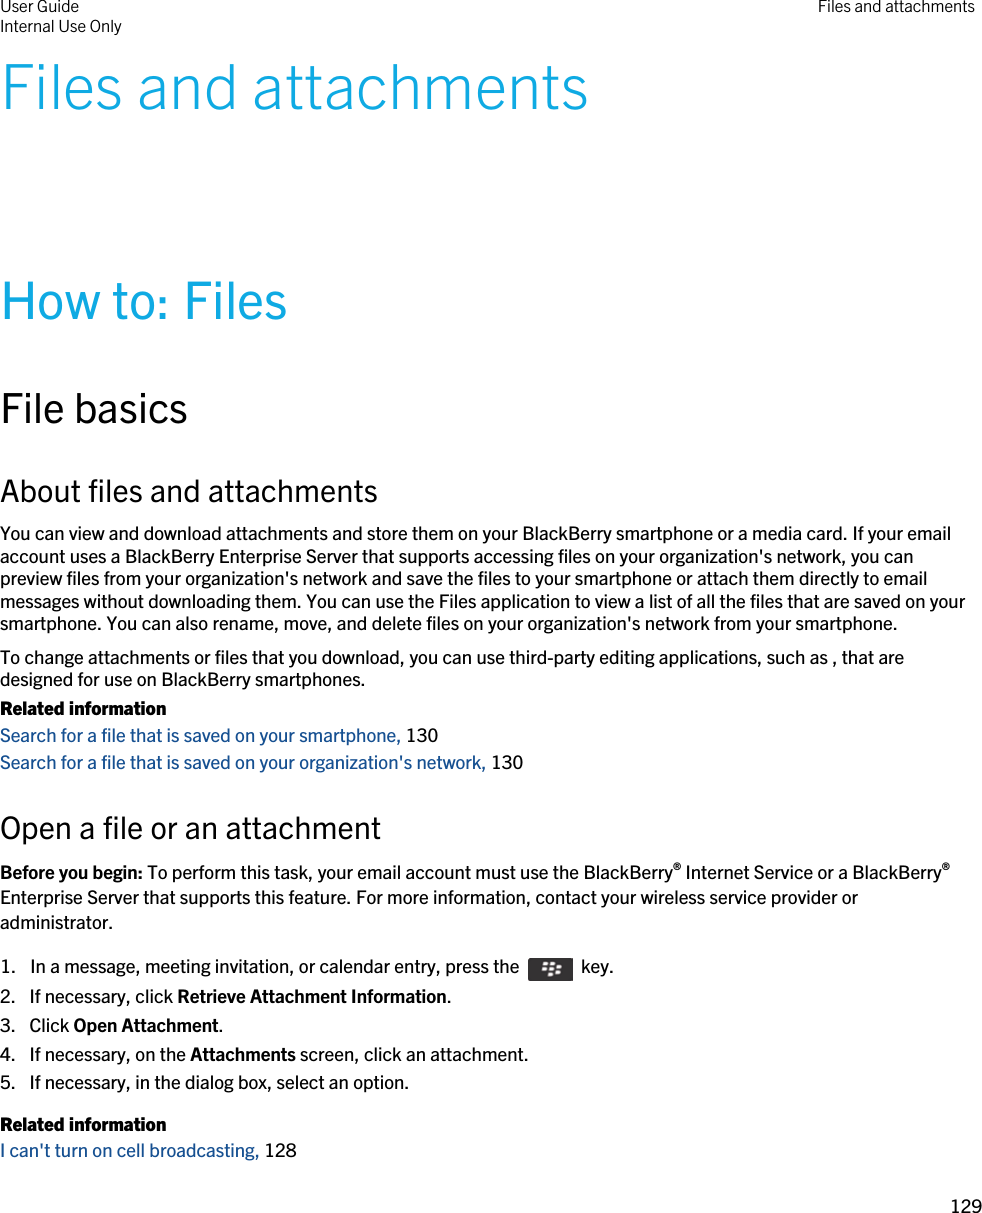 Files and attachmentsHow to: FilesFile basicsAbout files and attachmentsYou can view and download attachments and store them on your BlackBerry smartphone or a media card. If your email account uses a BlackBerry Enterprise Server that supports accessing files on your organization&apos;s network, you can preview files from your organization&apos;s network and save the files to your smartphone or attach them directly to email messages without downloading them. You can use the Files application to view a list of all the files that are saved on your smartphone. You can also rename, move, and delete files on your organization&apos;s network from your smartphone.To change attachments or files that you download, you can use third-party editing applications, such as , that are designed for use on BlackBerry smartphones.Related informationSearch for a file that is saved on your smartphone, 130Search for a file that is saved on your organization&apos;s network, 130Open a file or an attachmentBefore you begin: To perform this task, your email account must use the BlackBerry® Internet Service or a BlackBerry® Enterprise Server that supports this feature. For more information, contact your wireless service provider or administrator. 1.  In a message, meeting invitation, or calendar entry, press the    key. 2. If necessary, click Retrieve Attachment Information.3. Click Open Attachment.4. If necessary, on the Attachments screen, click an attachment.5. If necessary, in the dialog box, select an option.Related informationI can&apos;t turn on cell broadcasting, 128 User GuideInternal Use Only Files and attachments129 